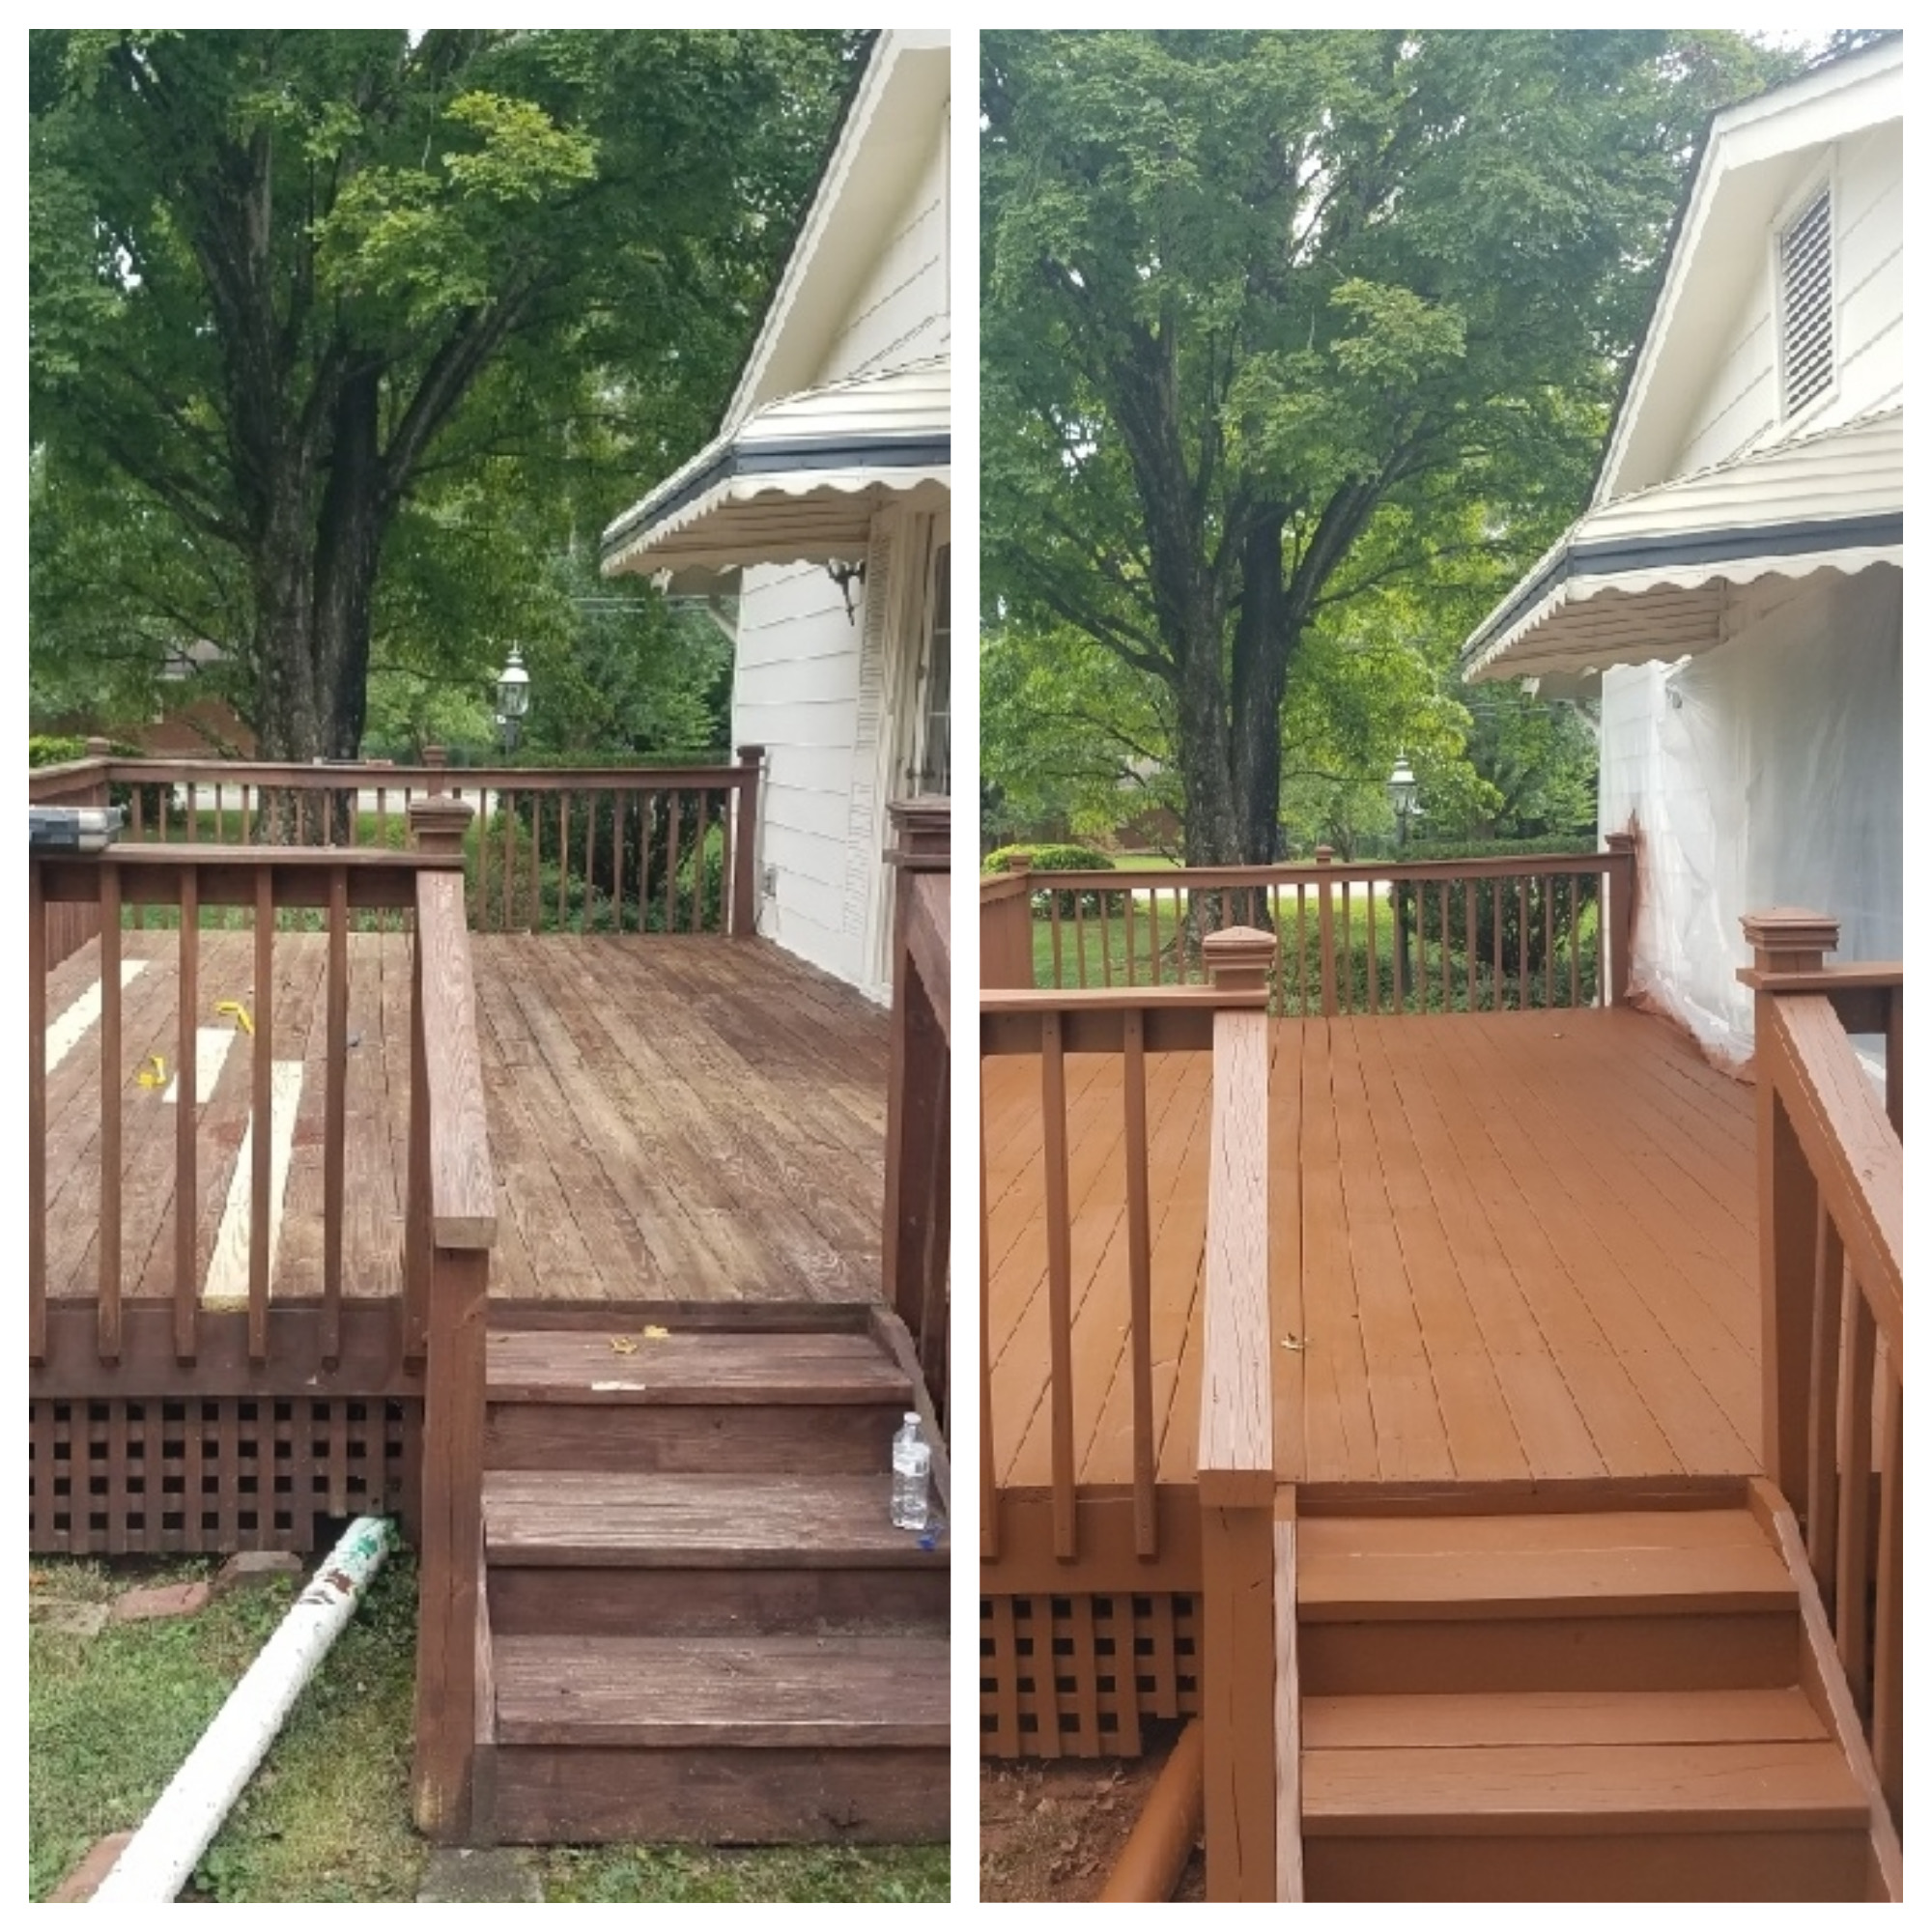 Deck Painting Project